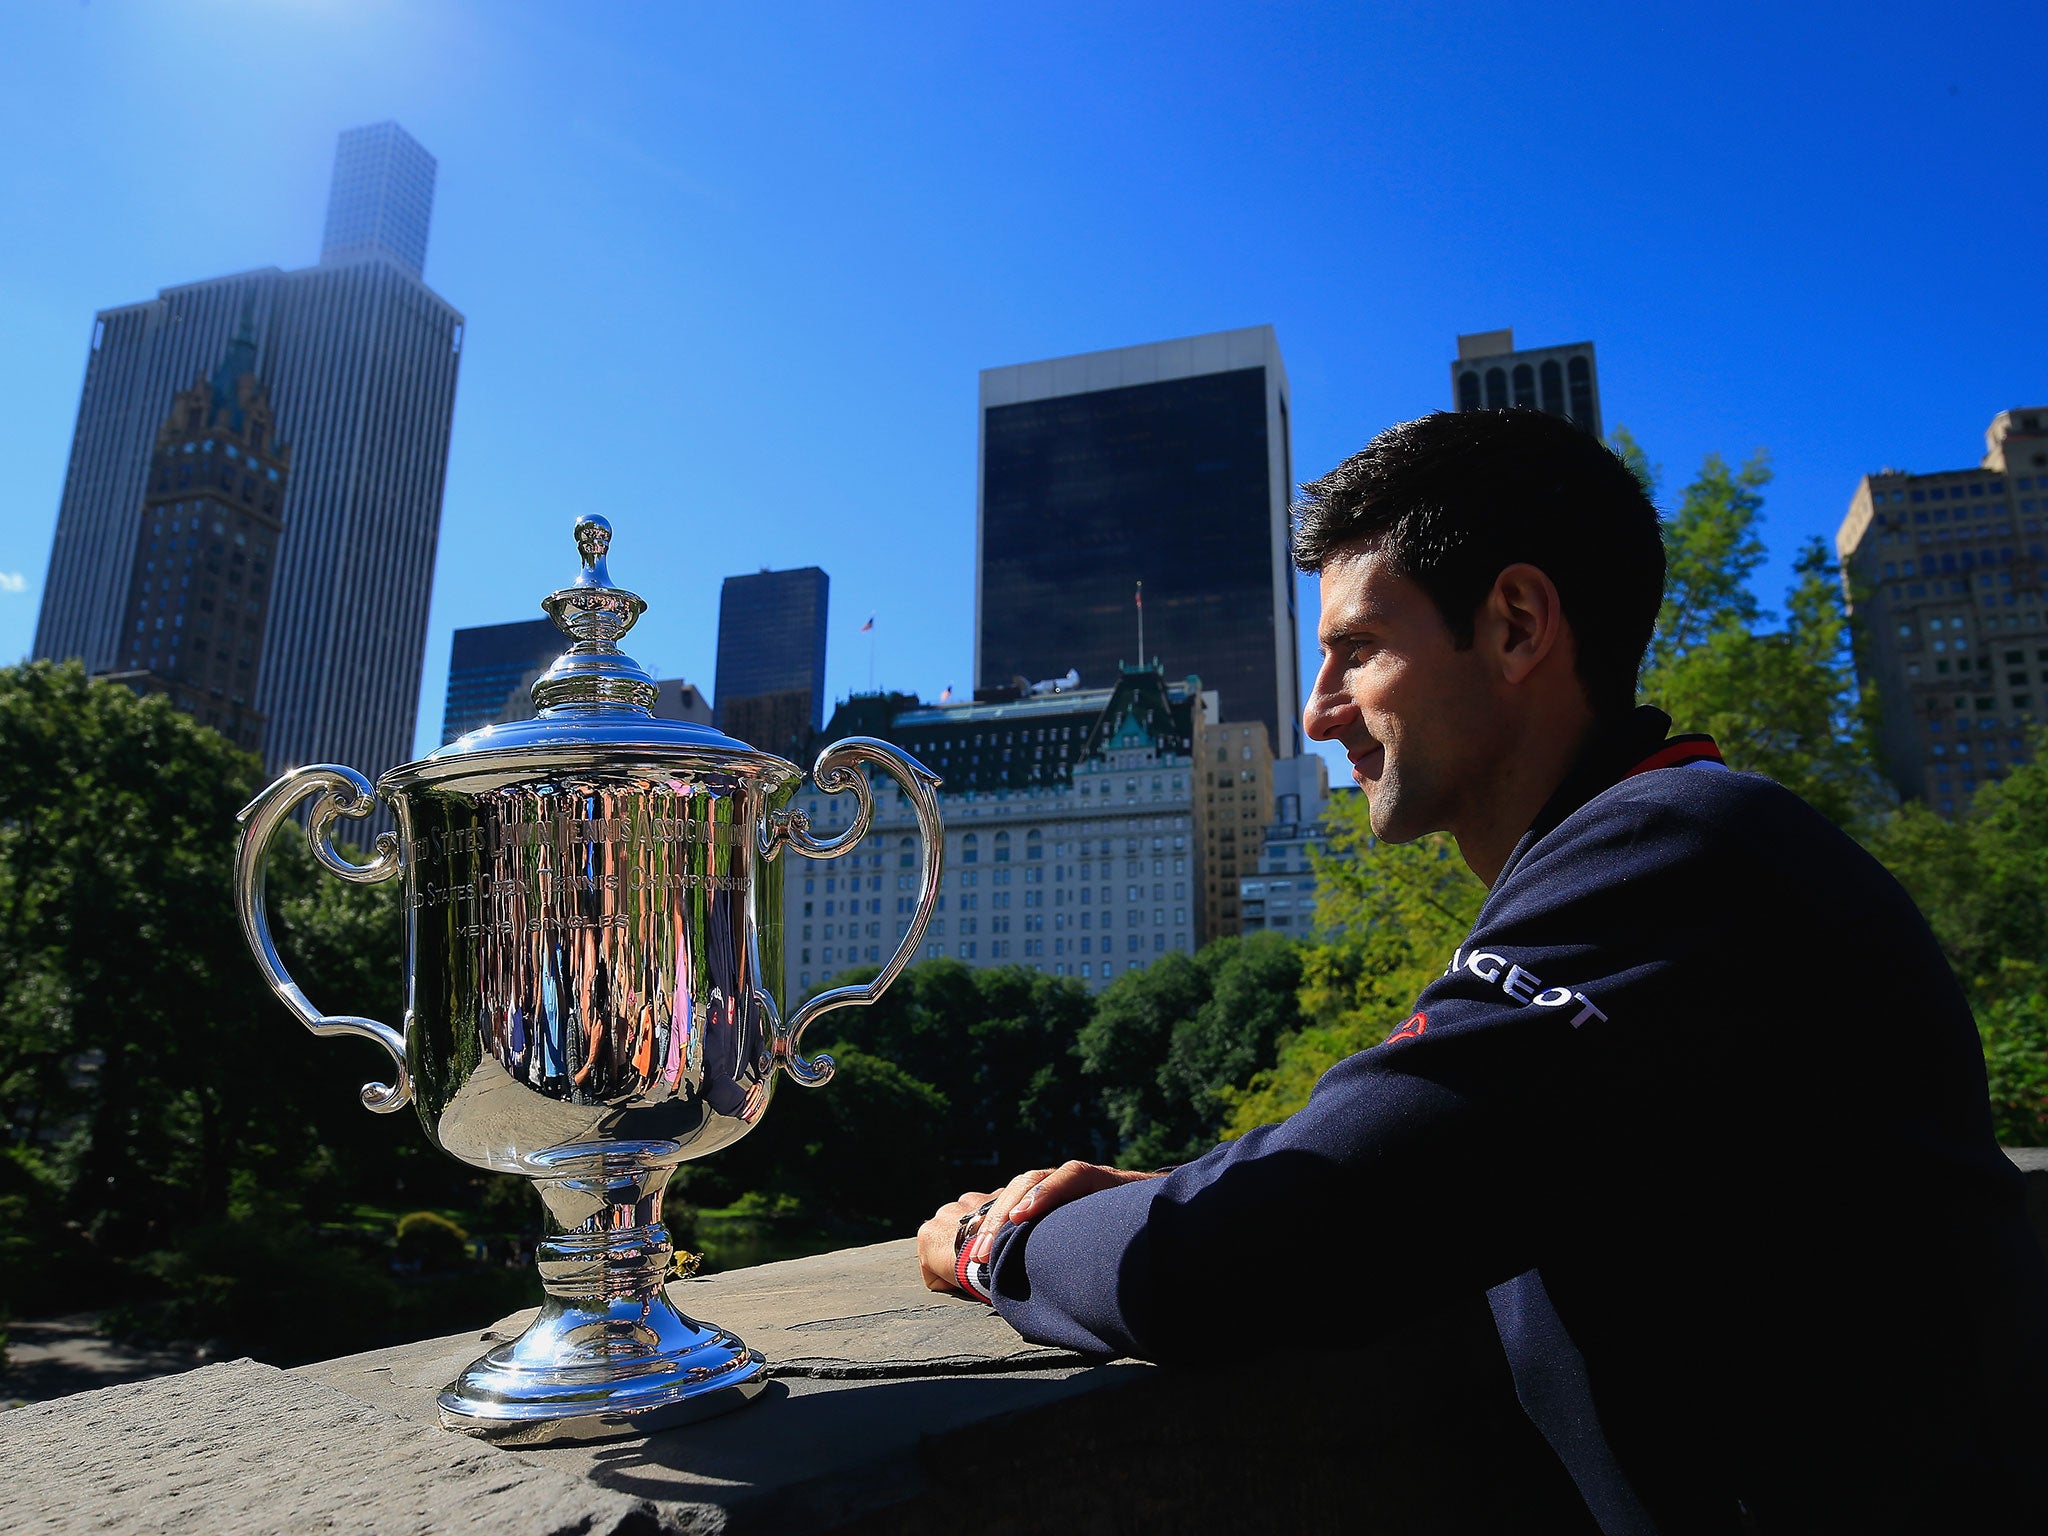 Djokovic's season is developing into one of the greatest ever